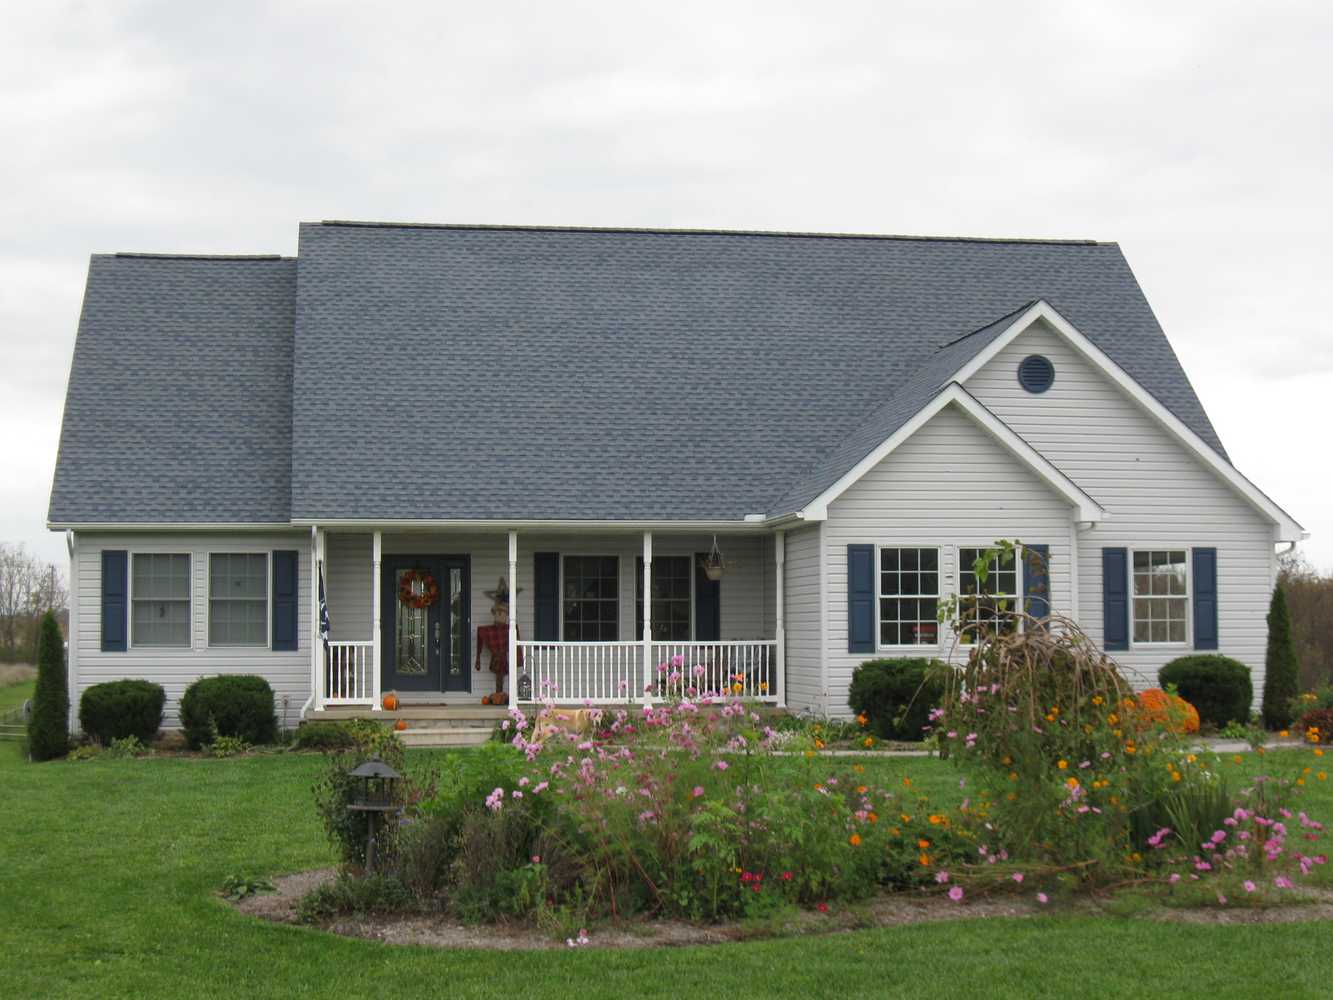 Clugstons Roofing, Siding And Remodeling Project